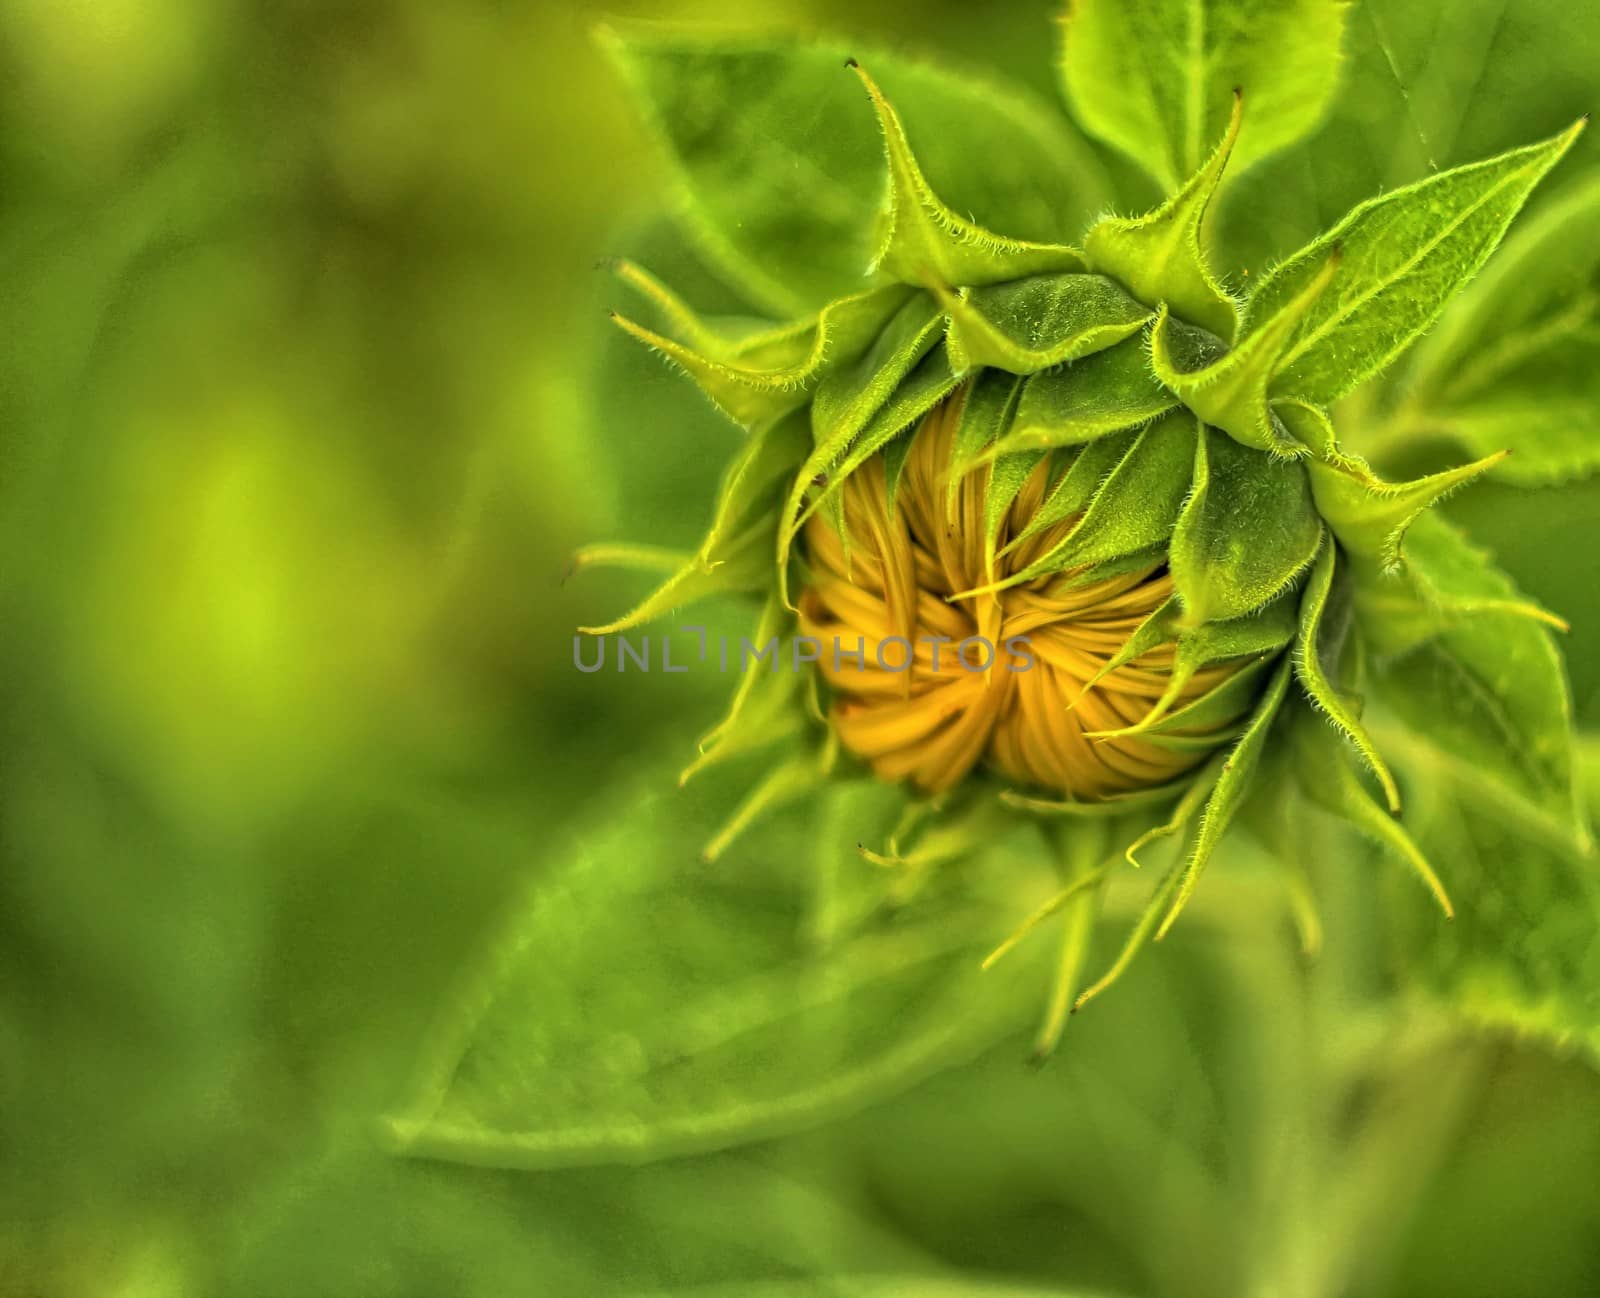 Sunflower surrounded by green leaves by sanzios